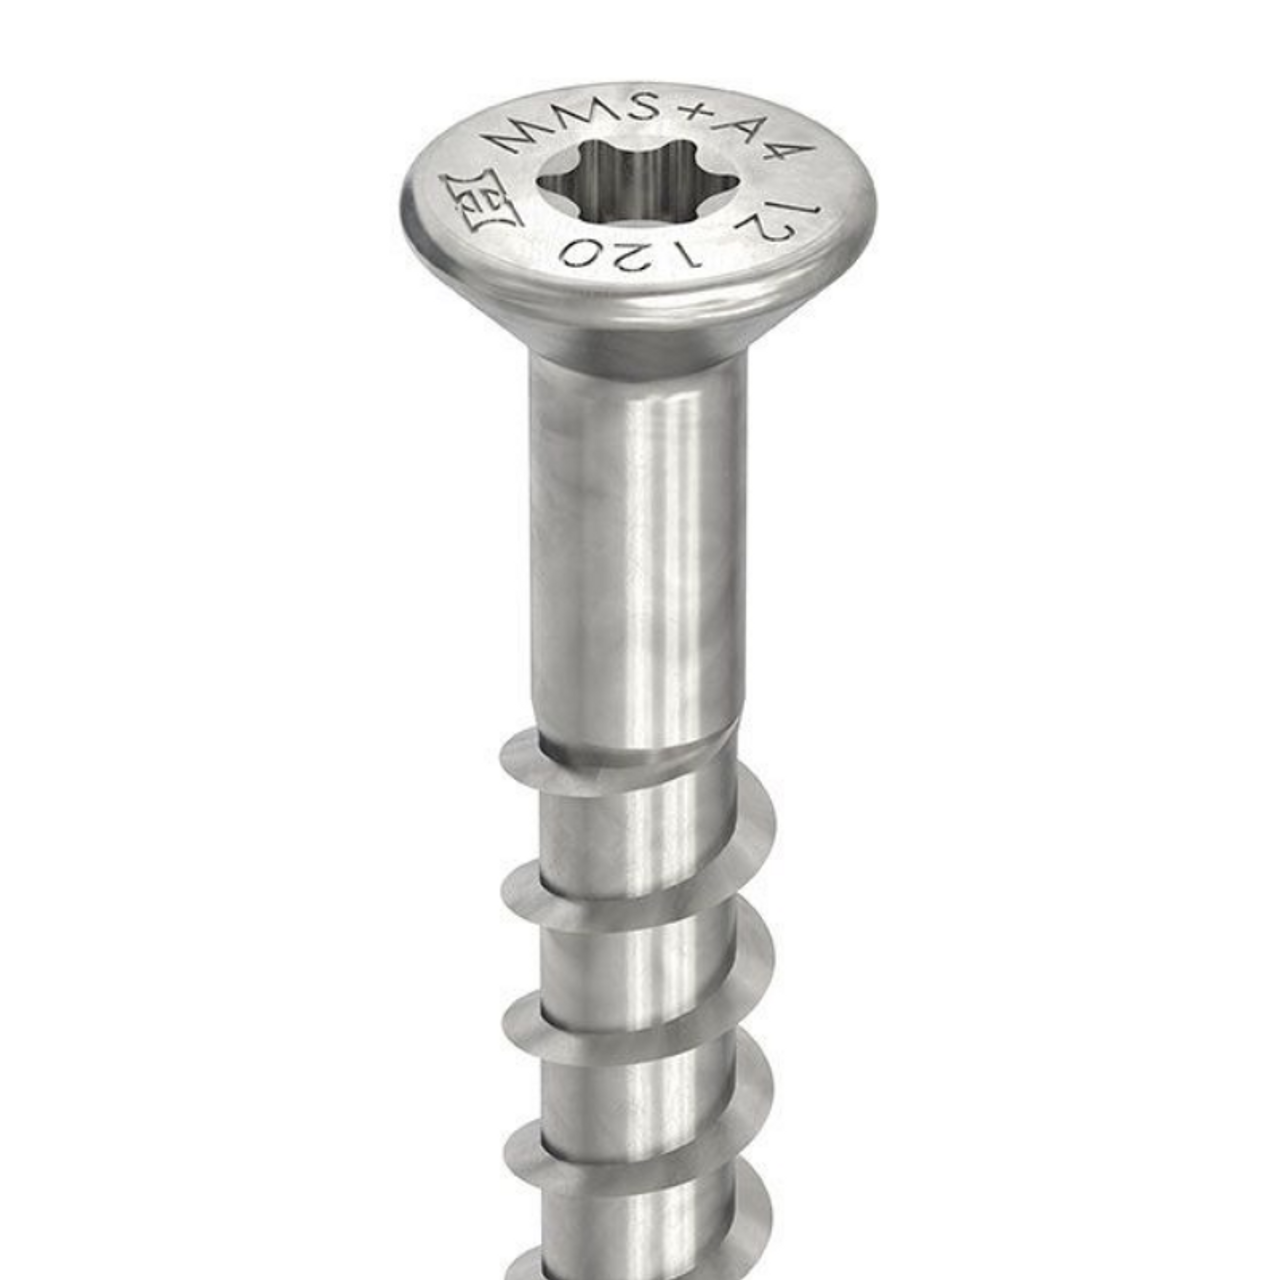 Craftsman Hardware supplies Countersunk Head Screw Anchor such as HECO 10mm A4 316 Stainless Steel Hexagon Head Screw Anchor for the Construction Industry in Australia and New Zealand